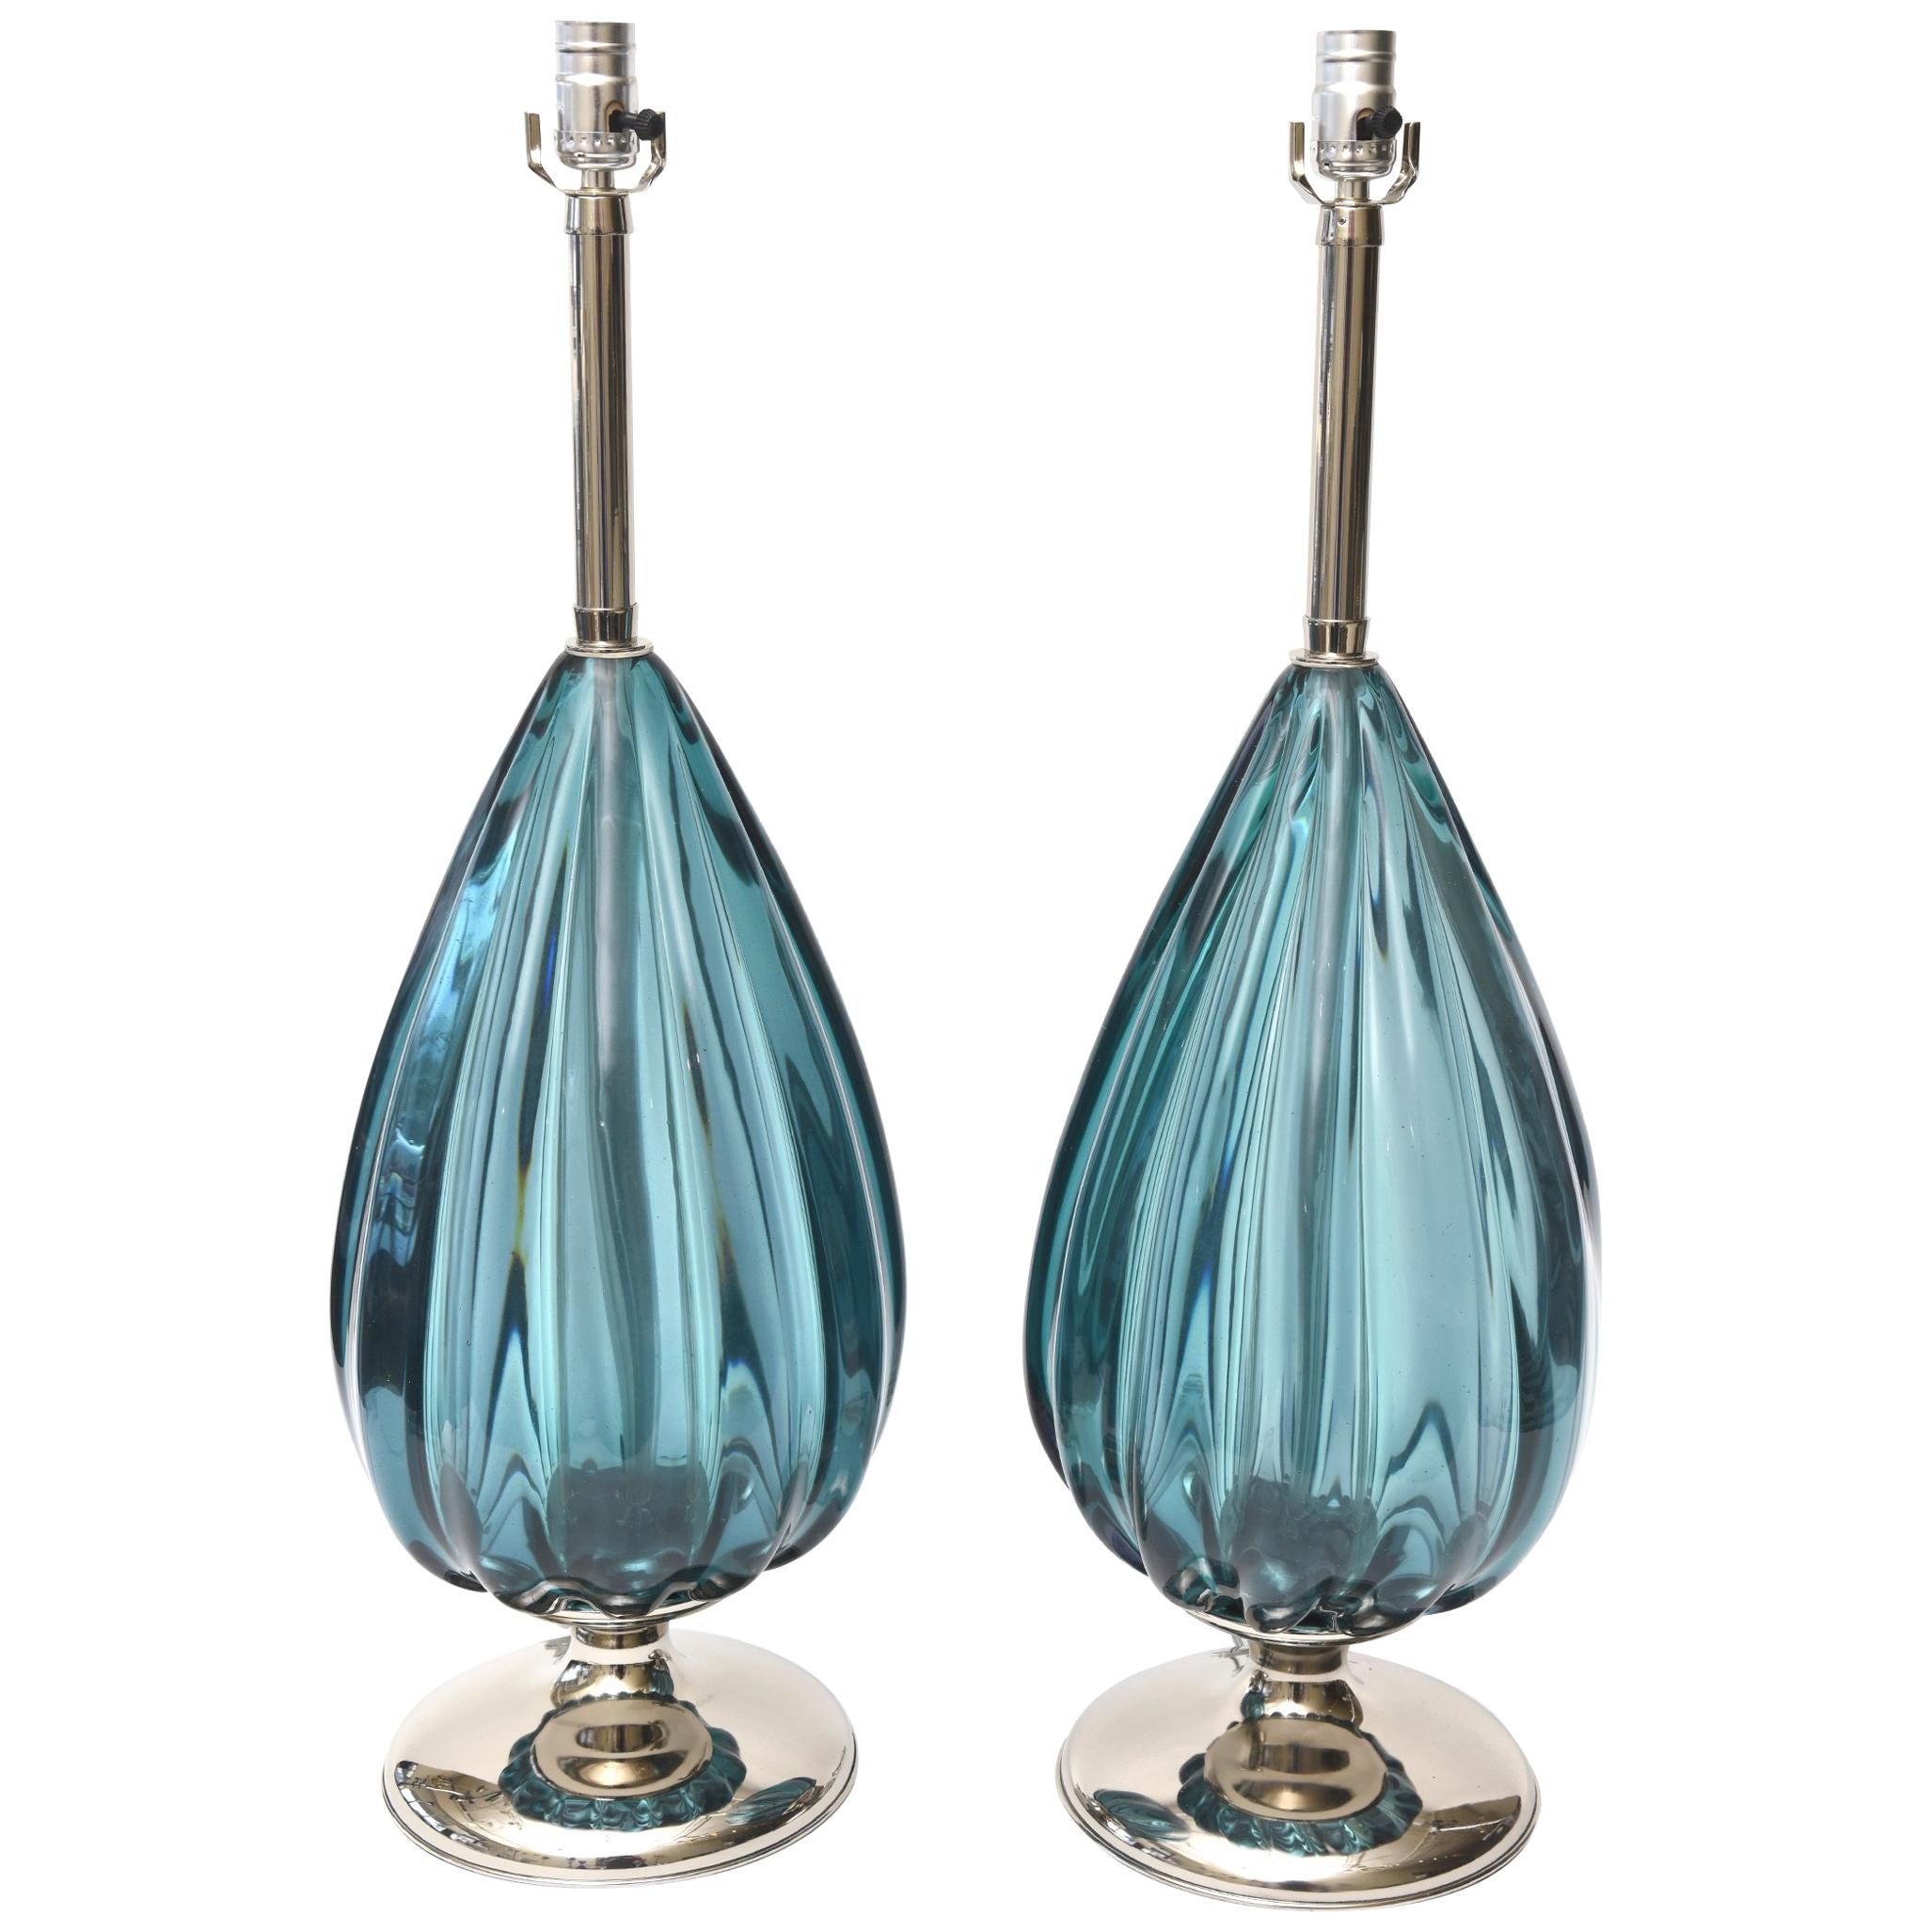  Murano Archimede Seguso Sapphire Glass and Nickel Silver Lamps Pair Of